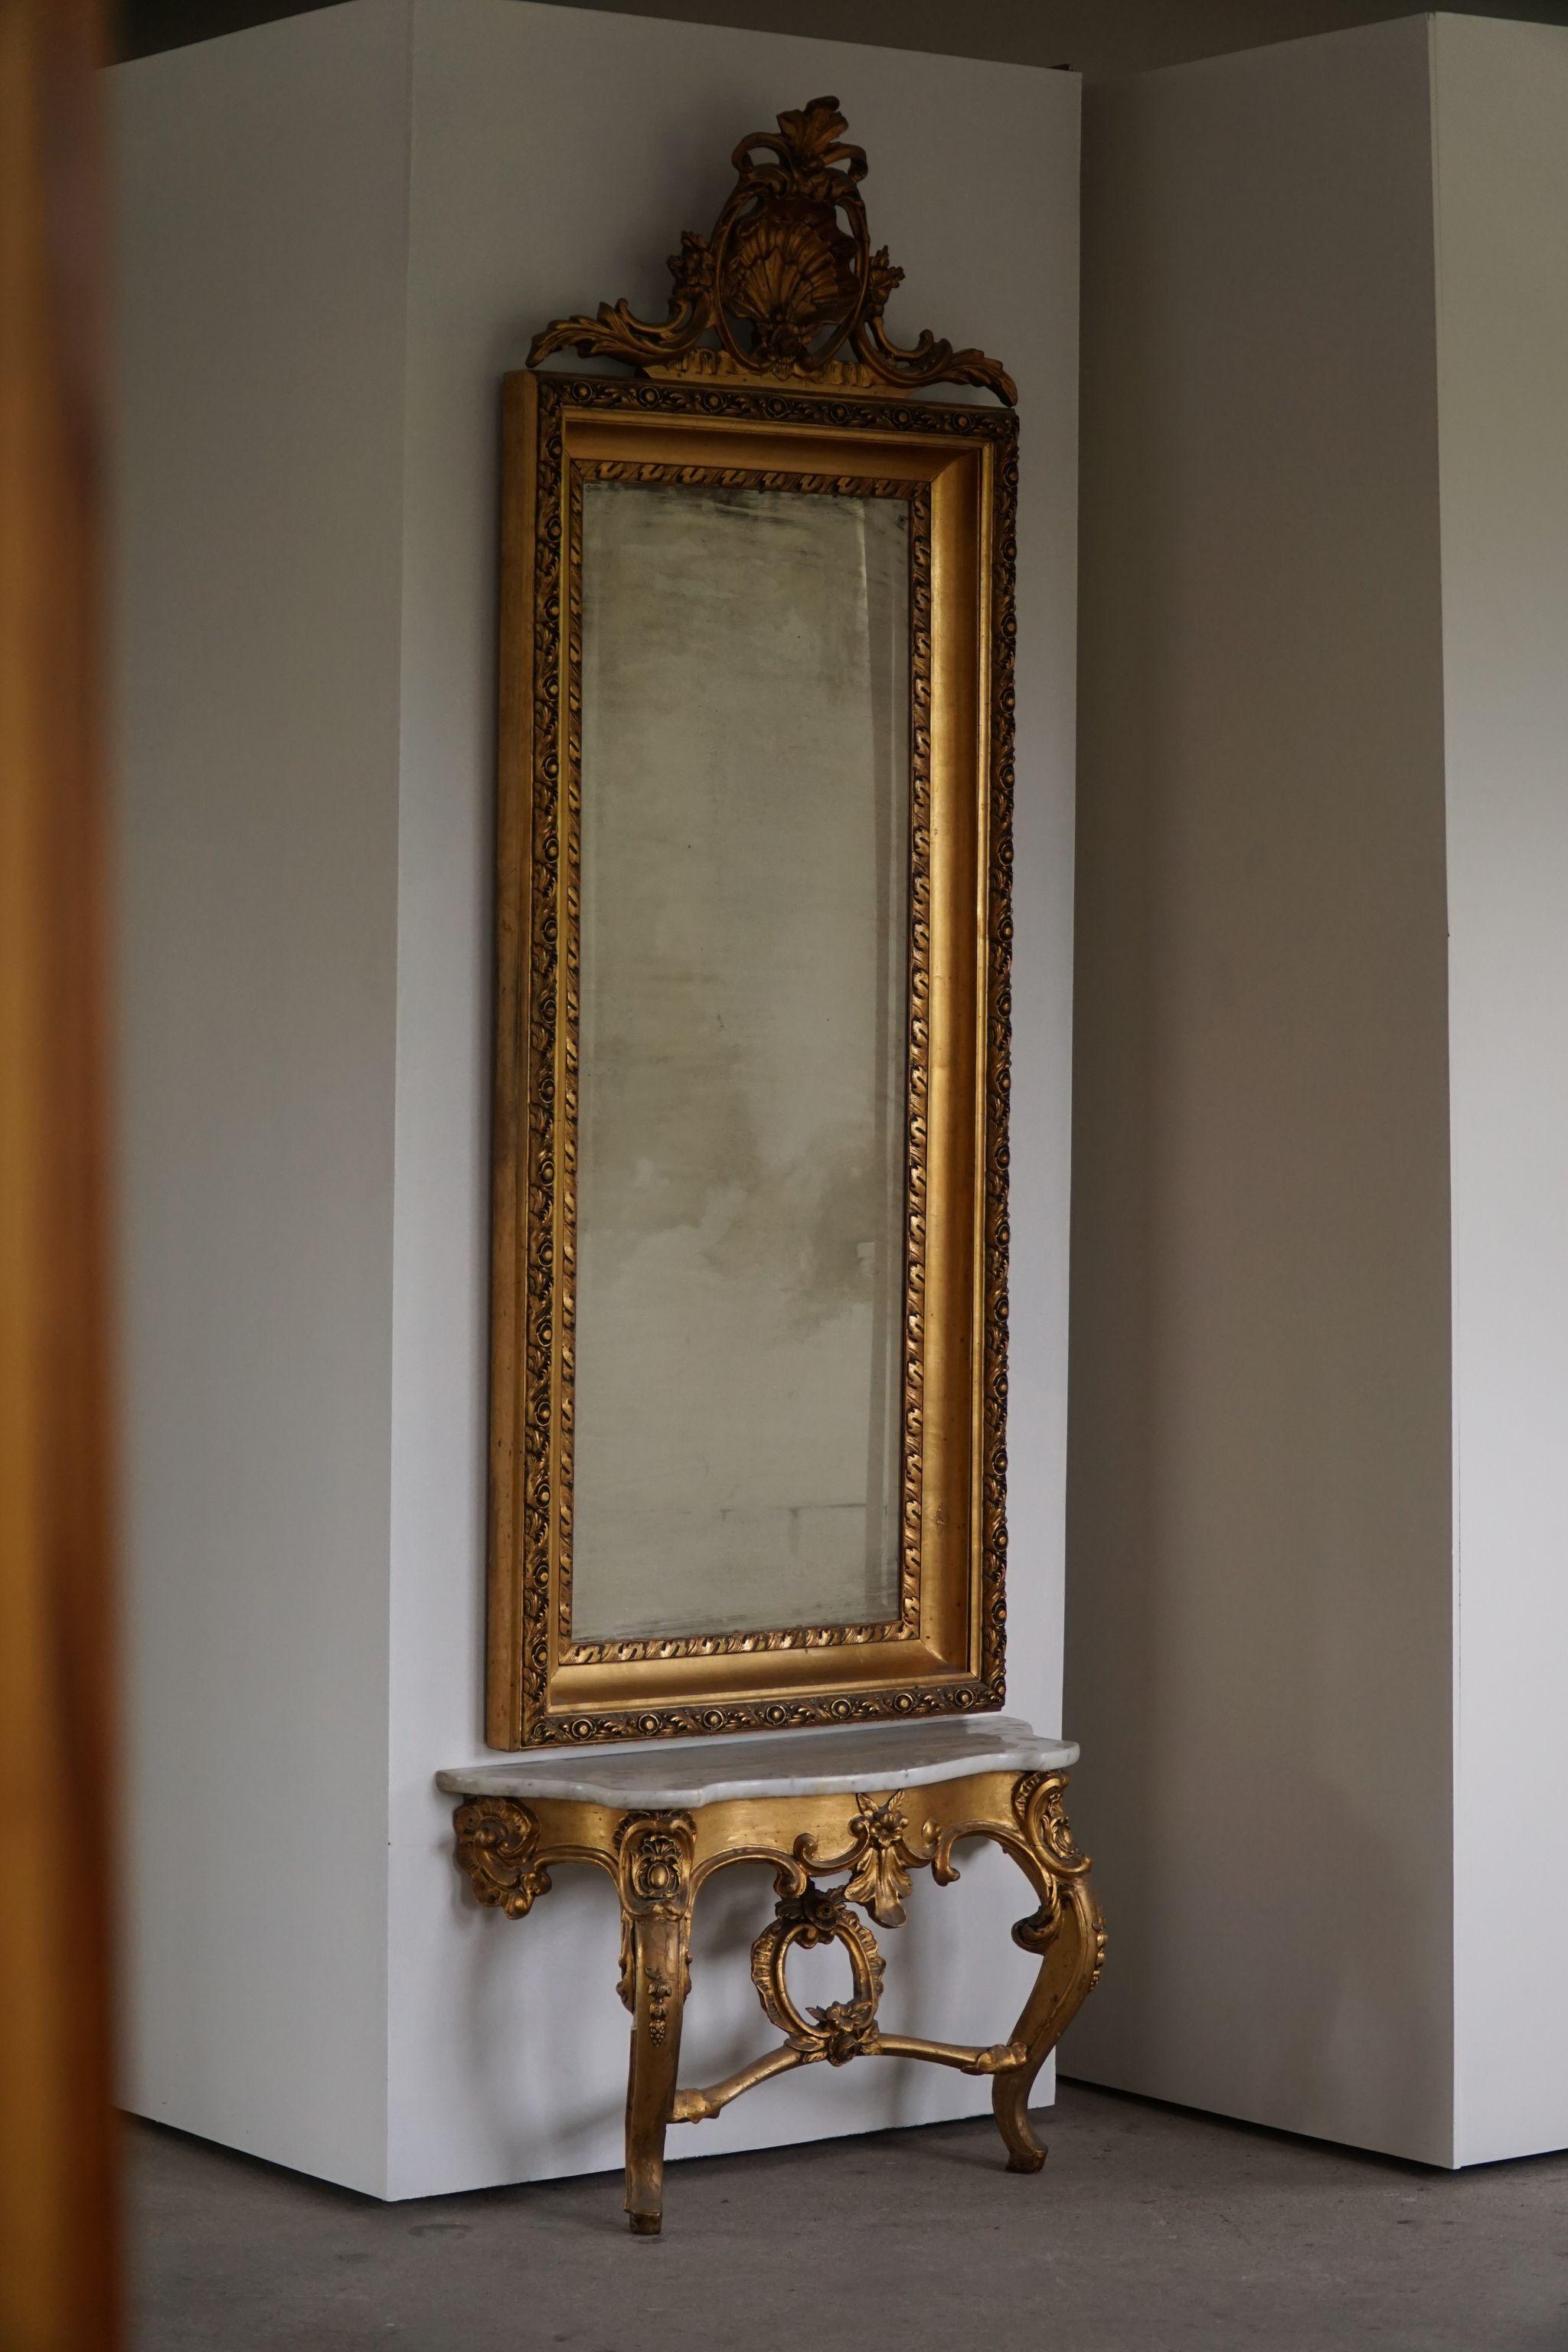 Antique Danish Mid-19th Century Rococo Gold Plated Mirror For Sale 5